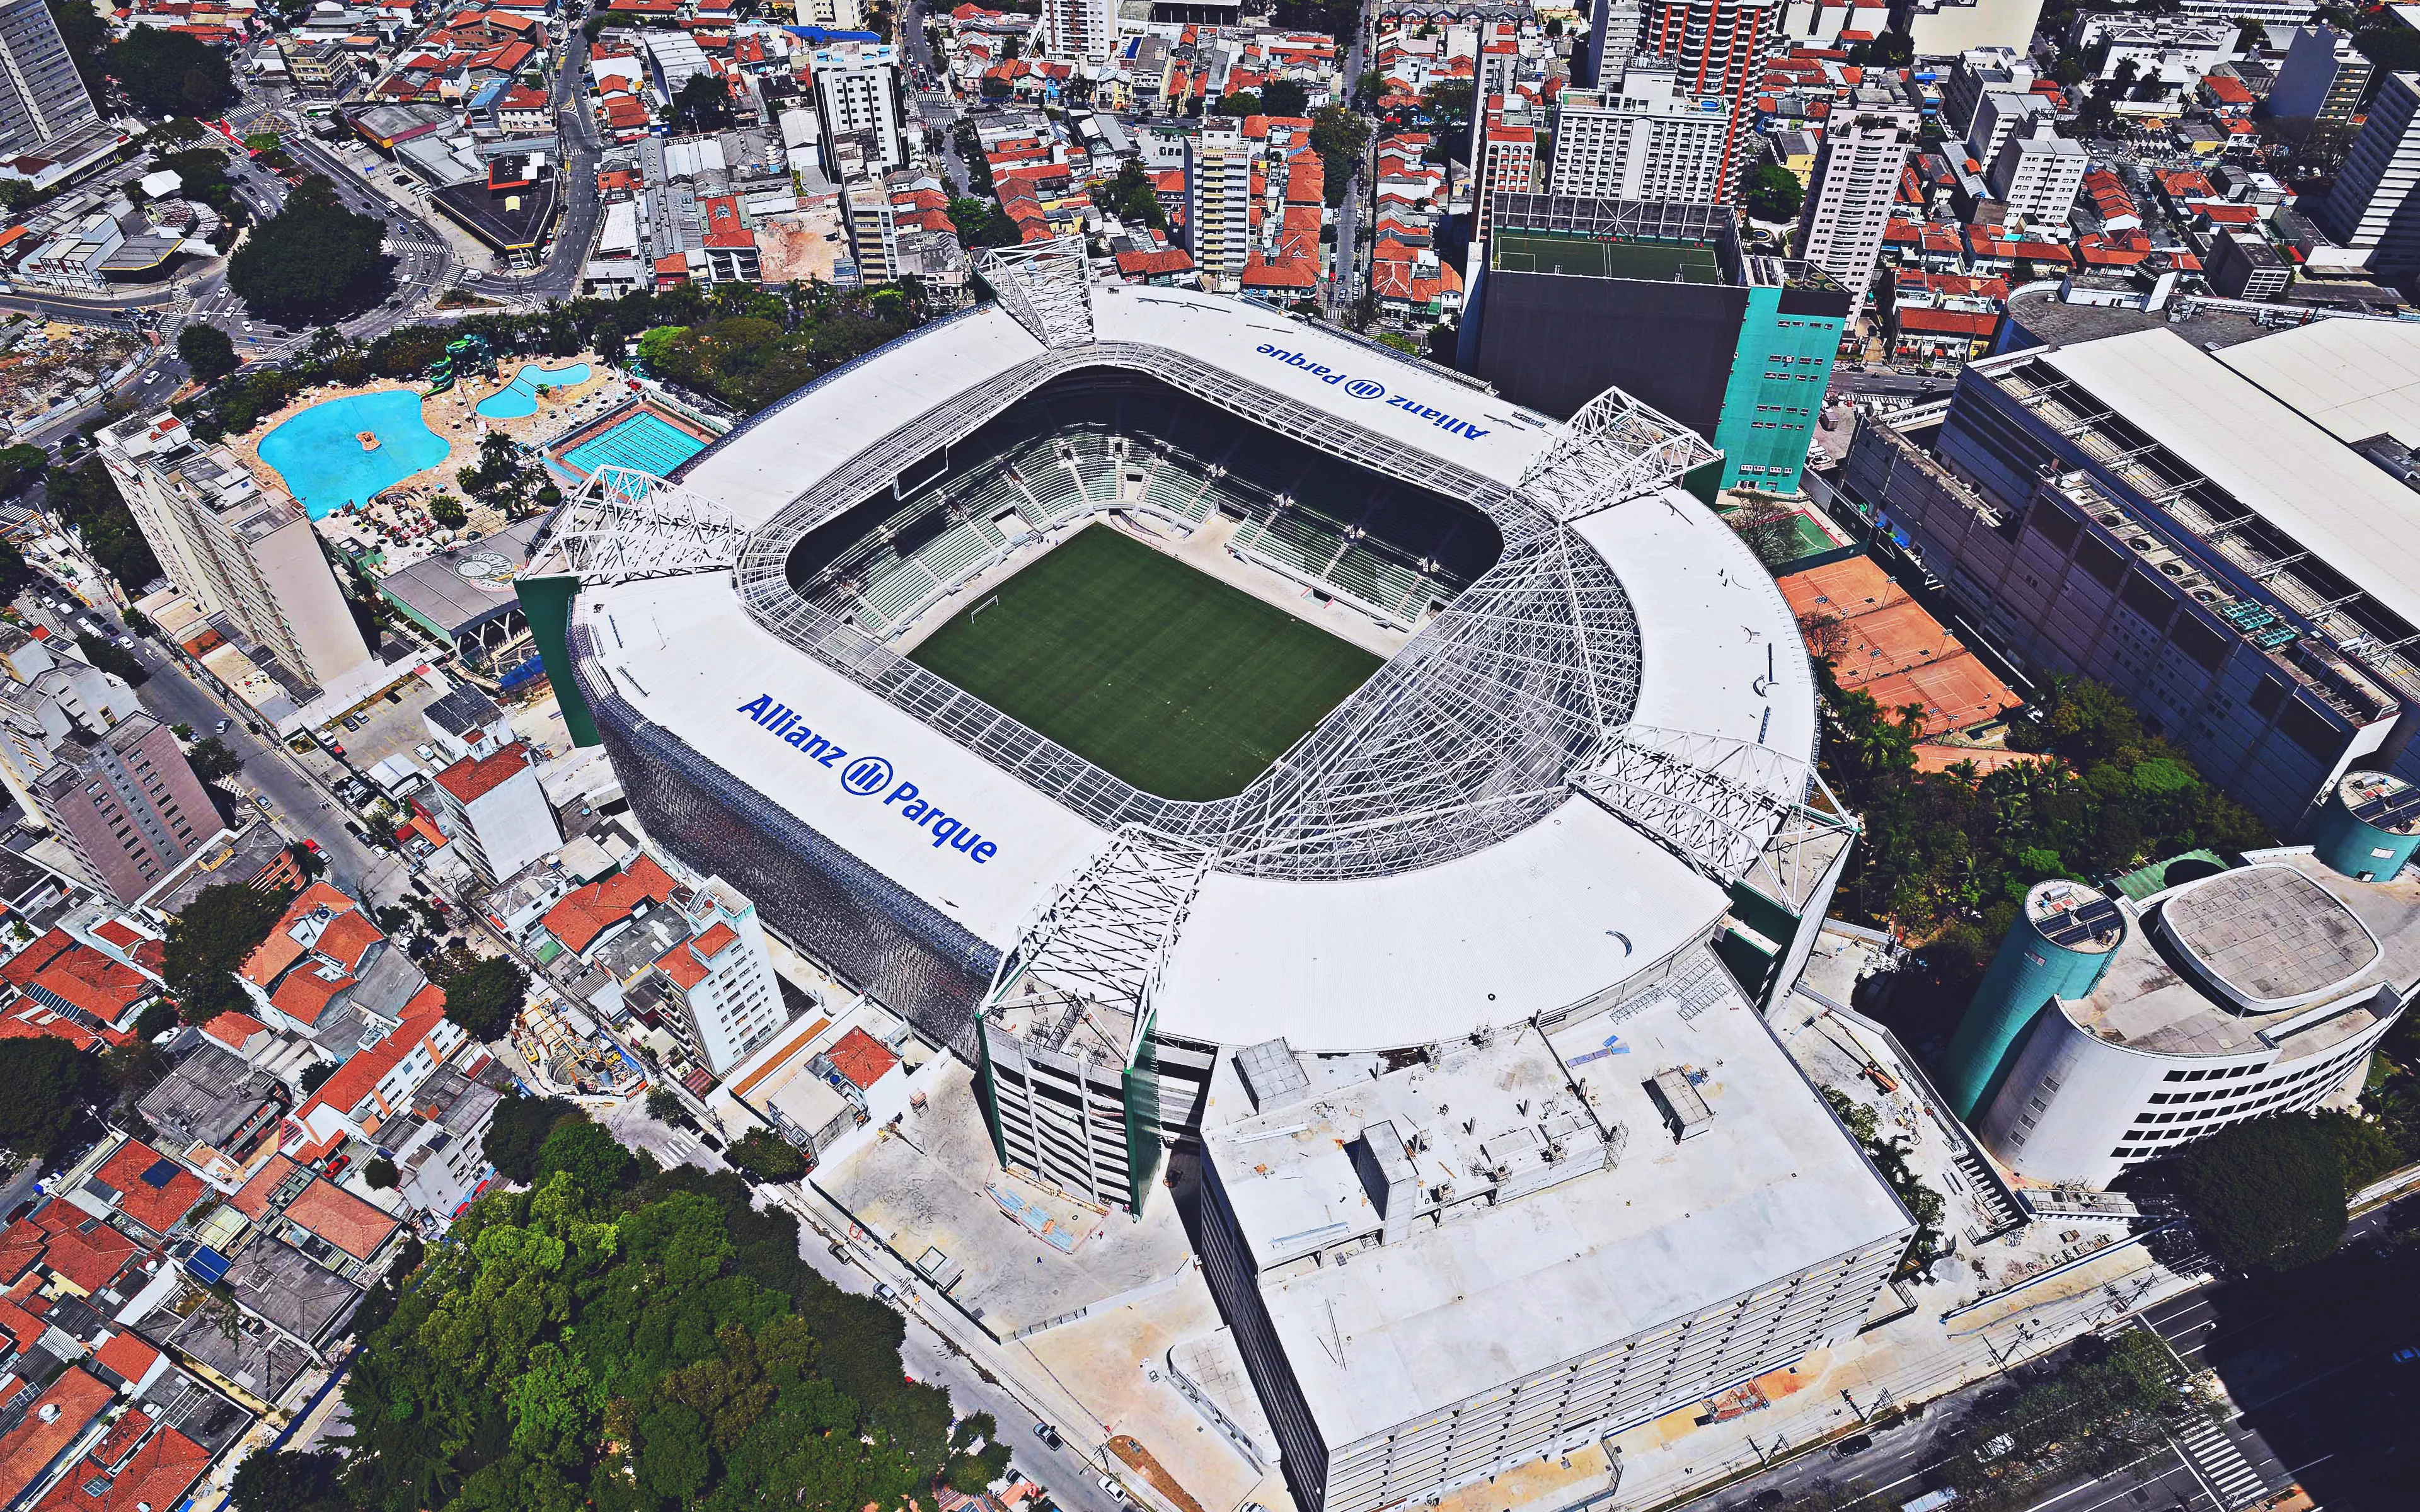 Allianz Parque in Brazil, South America | Football - Rated 7.4